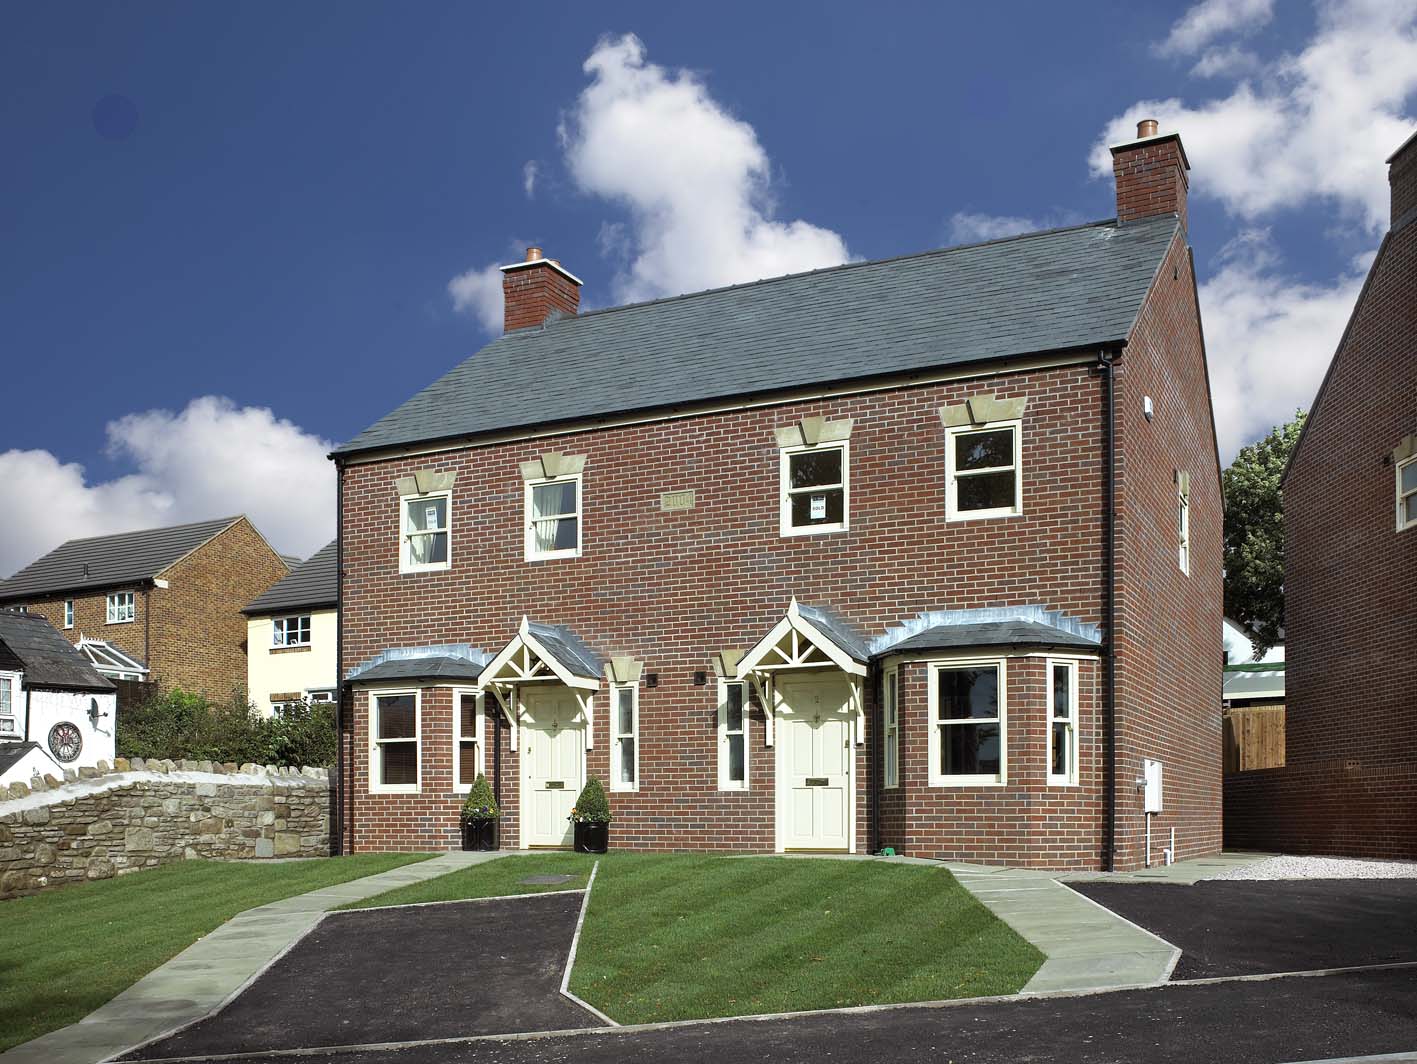 New detached and semi detached houses on Greenfield site in Coleford, Gloucestershire